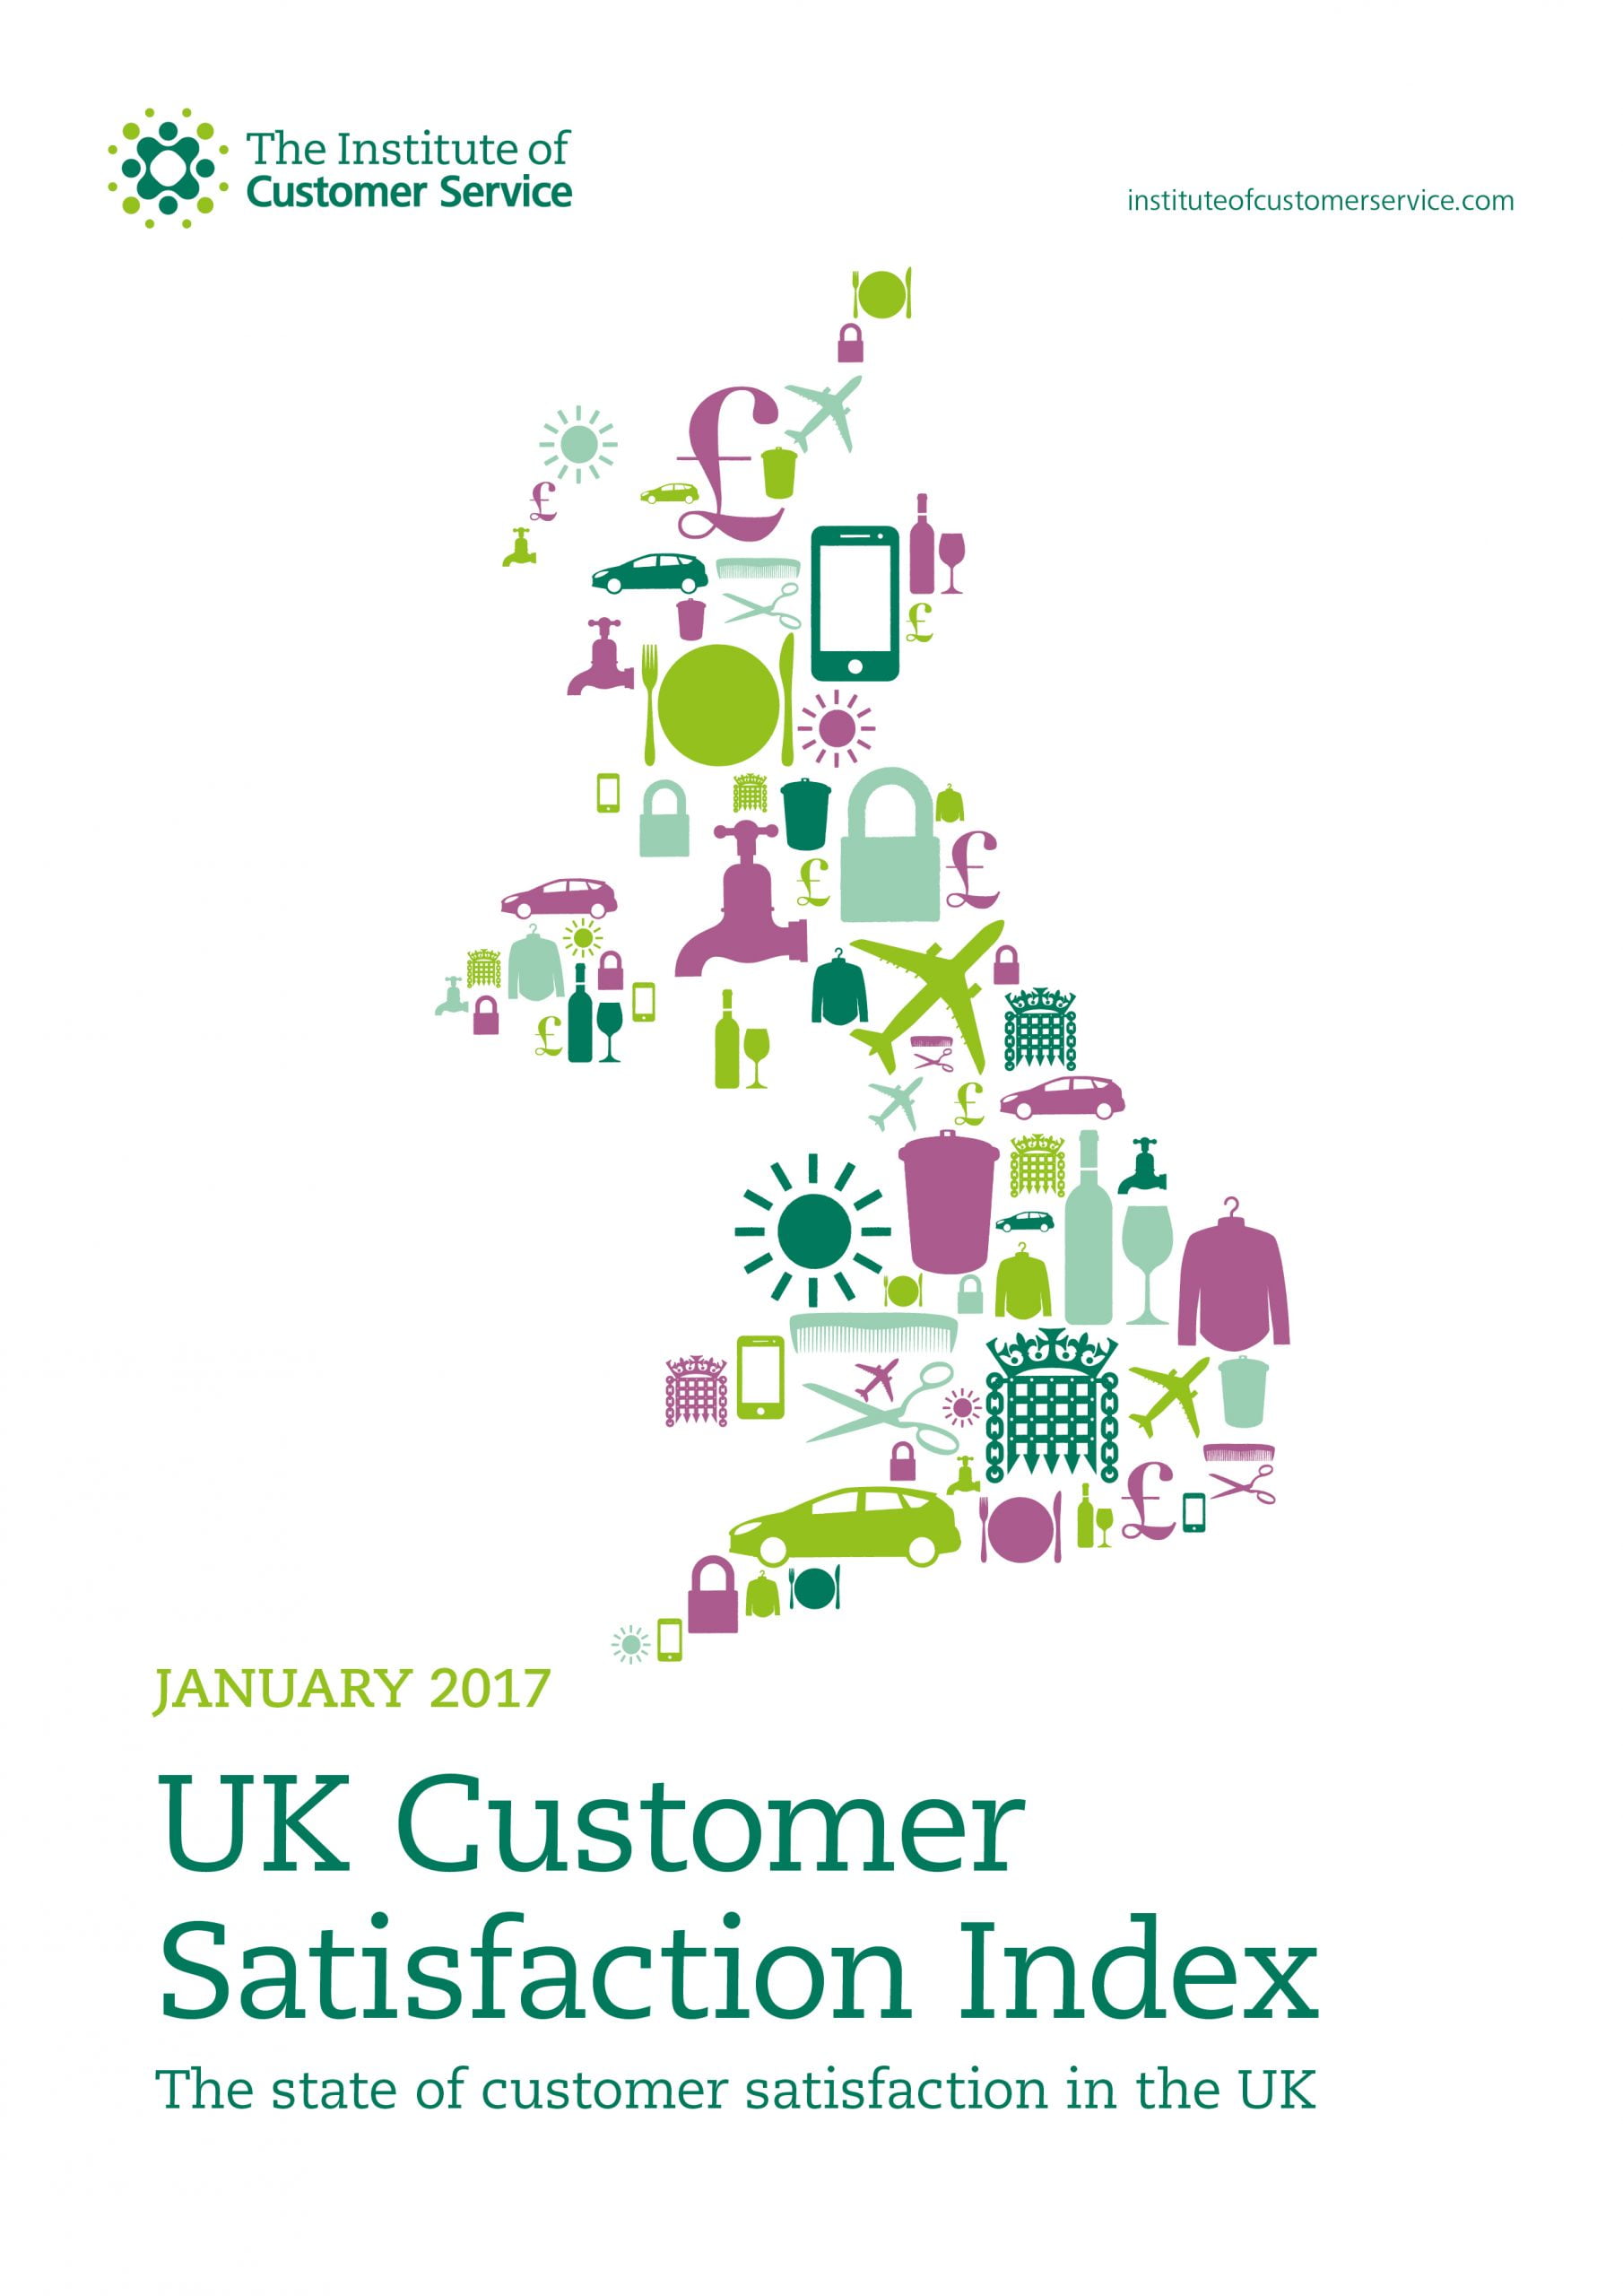 UKCSI: The state of customer satisfaction in the UK – January 2017